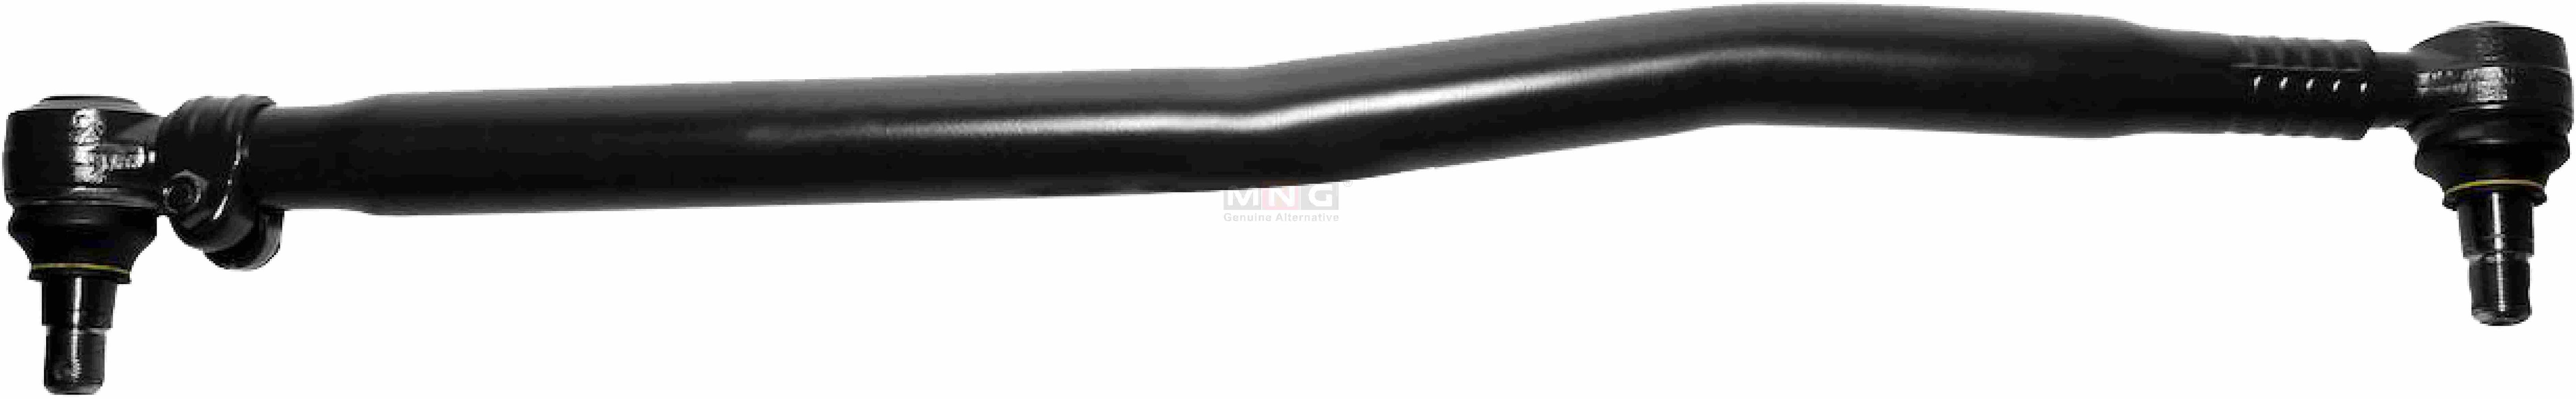 04793166-MNG-DRAG-LINK-IVECO